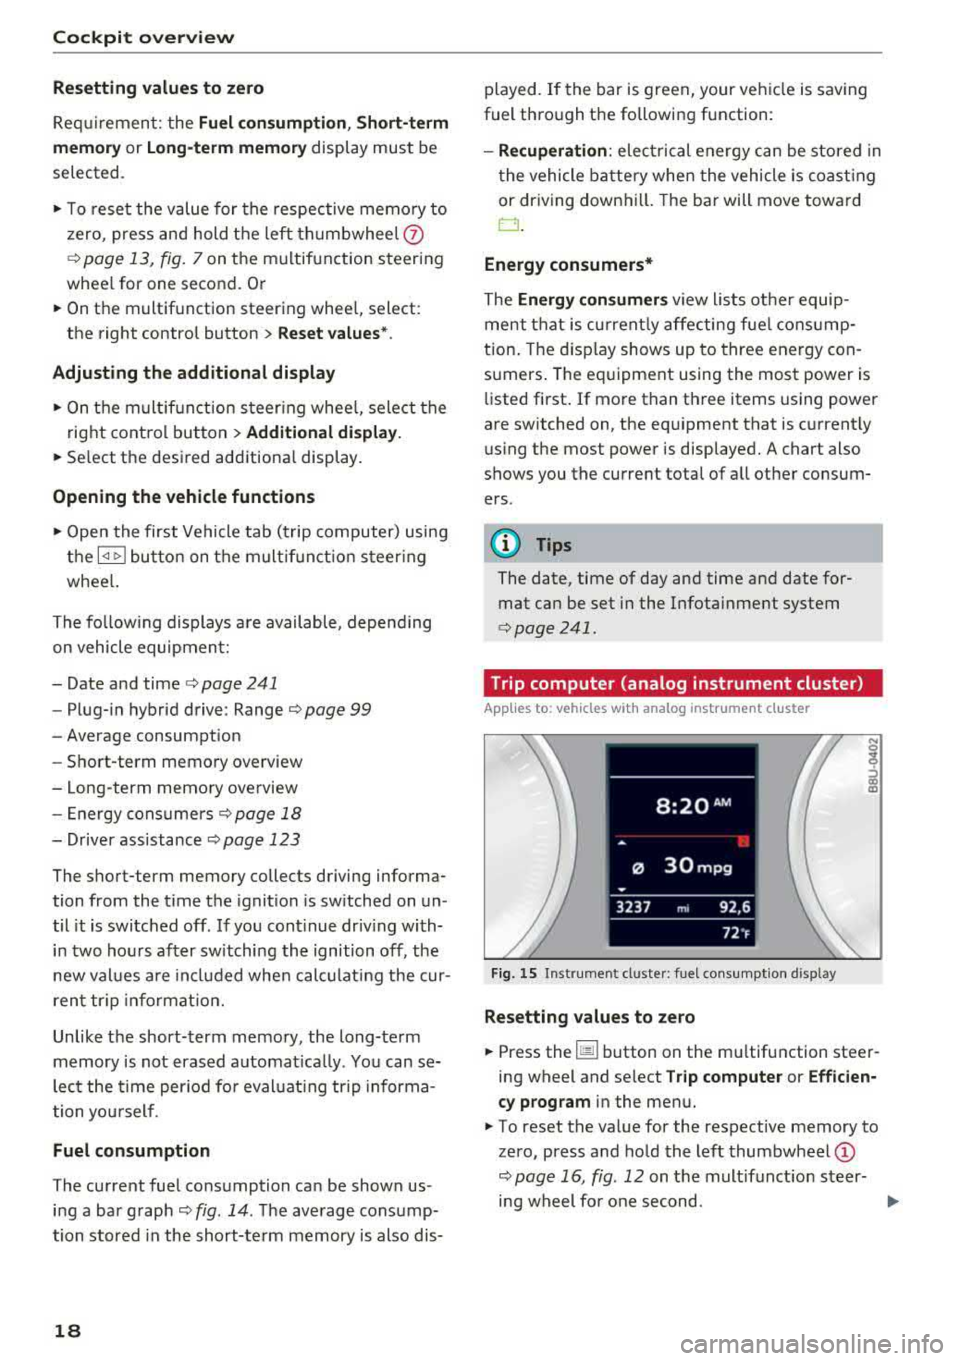 AUDI A3 SEDAN 2017  Owners Manual Cockpit over view 
Resetting  values  to  zero 
Req uirement:  the Fuel  consumption , Short- term 
m emor y or  Long-term  memo ry 
display  must  be 
selected . 
~ To  reset  the  value  for  the  r